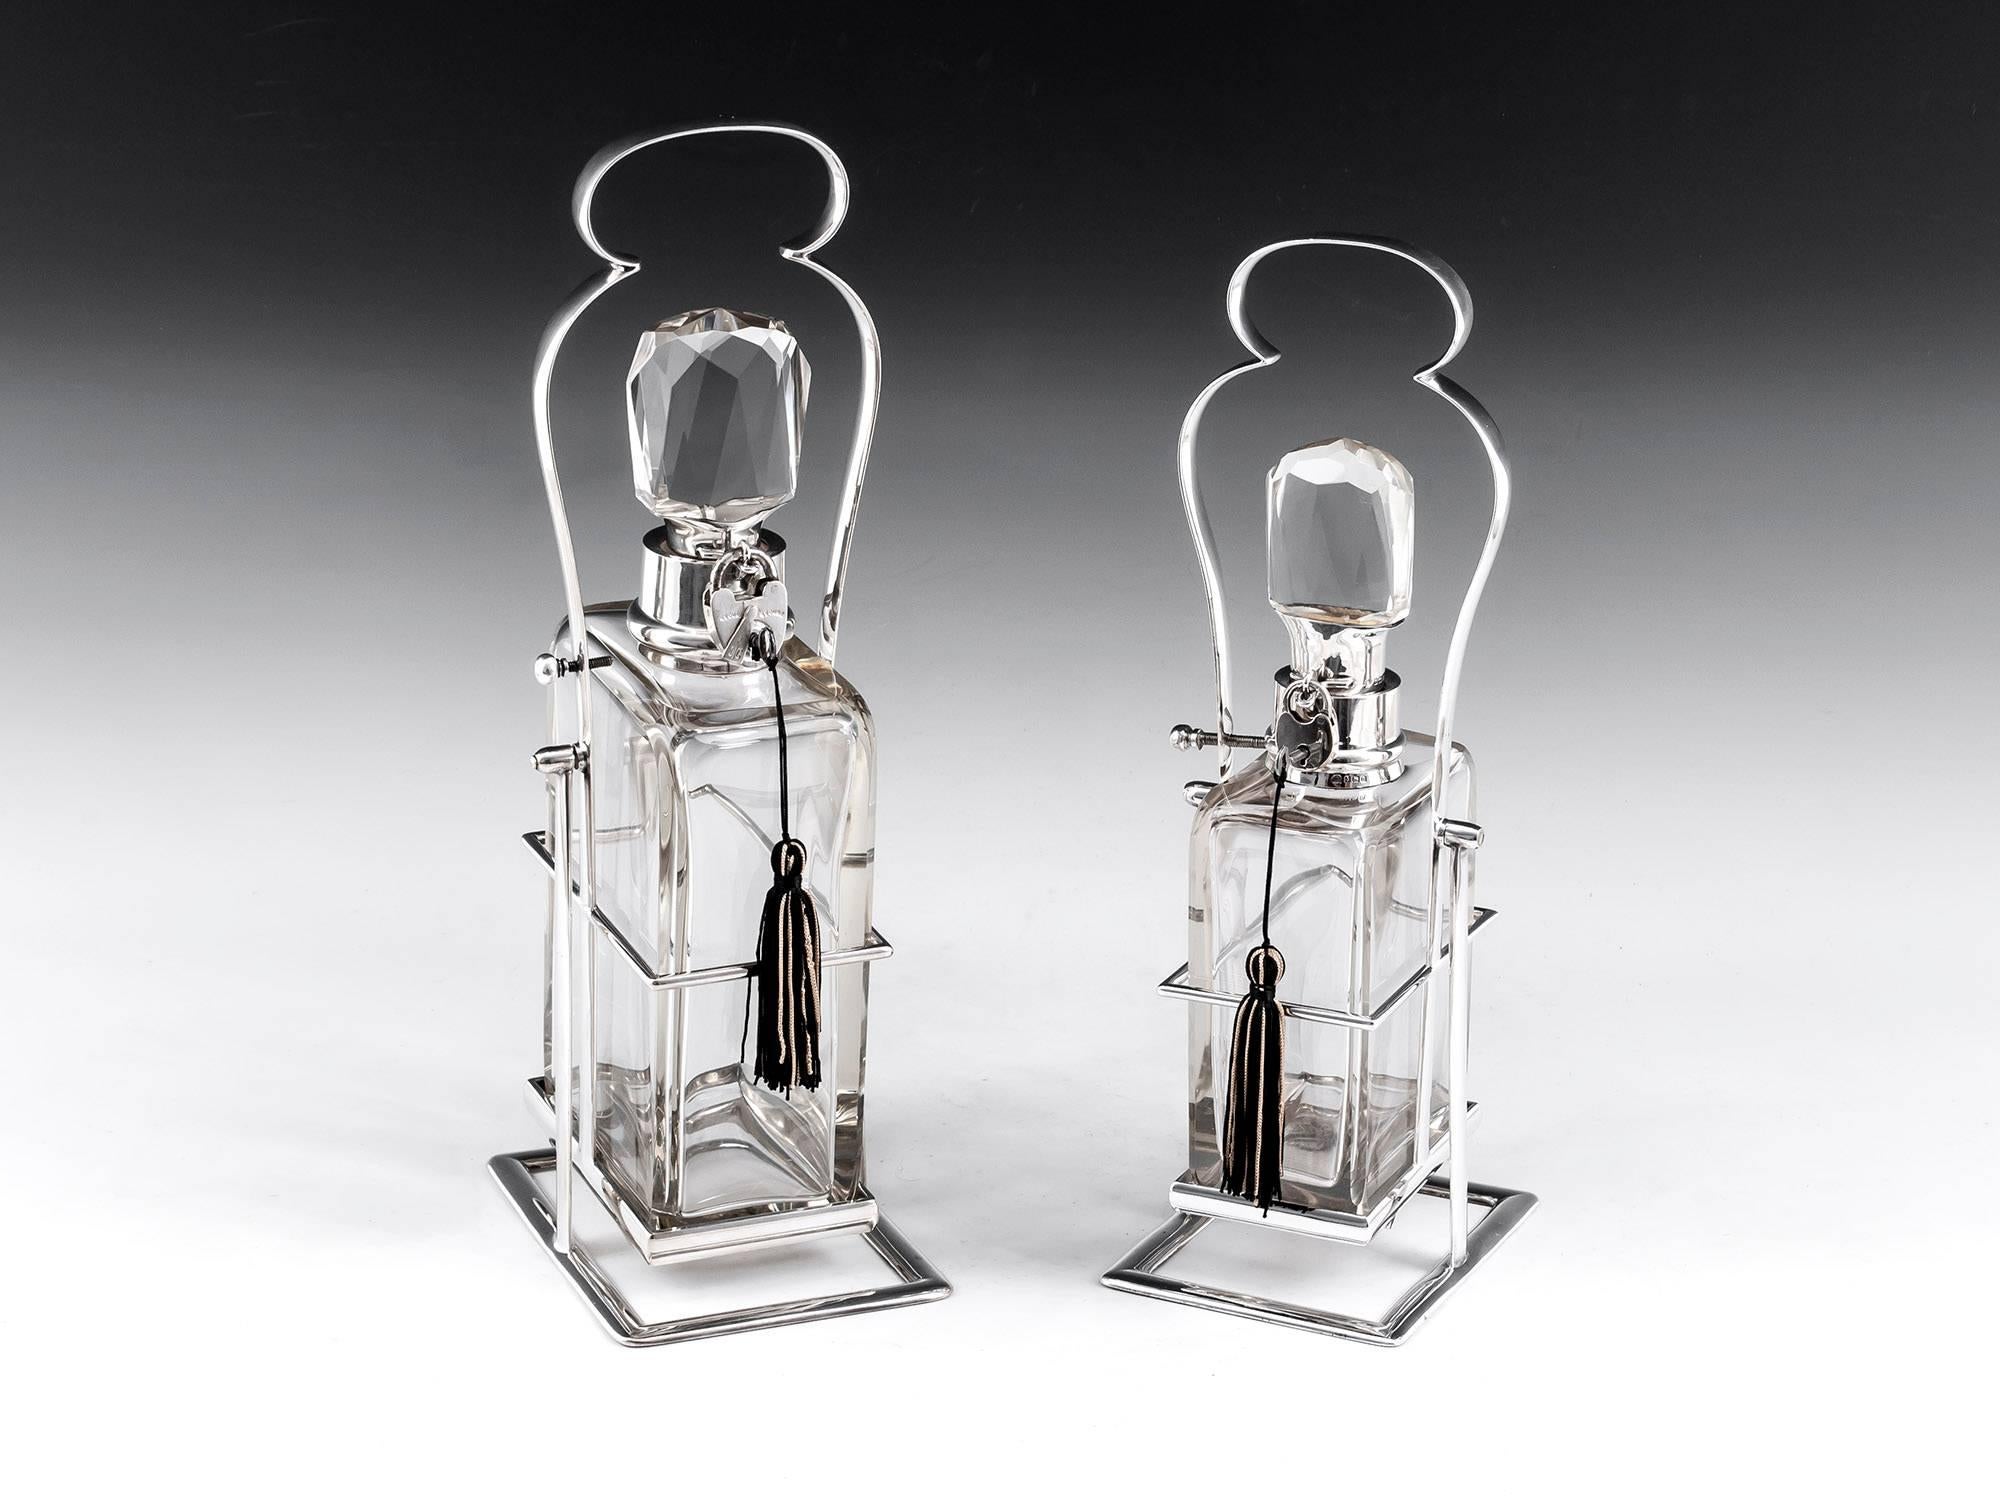 Rare pair of stylish Hukin & Heath decanters within their own carrying frames. The smaller is hallmarked Birmingham 1912 Hukin & Heath on the neck and stopper, the larger hallmarked Birmingham 1910. The fabulous frames have registered design stamps,